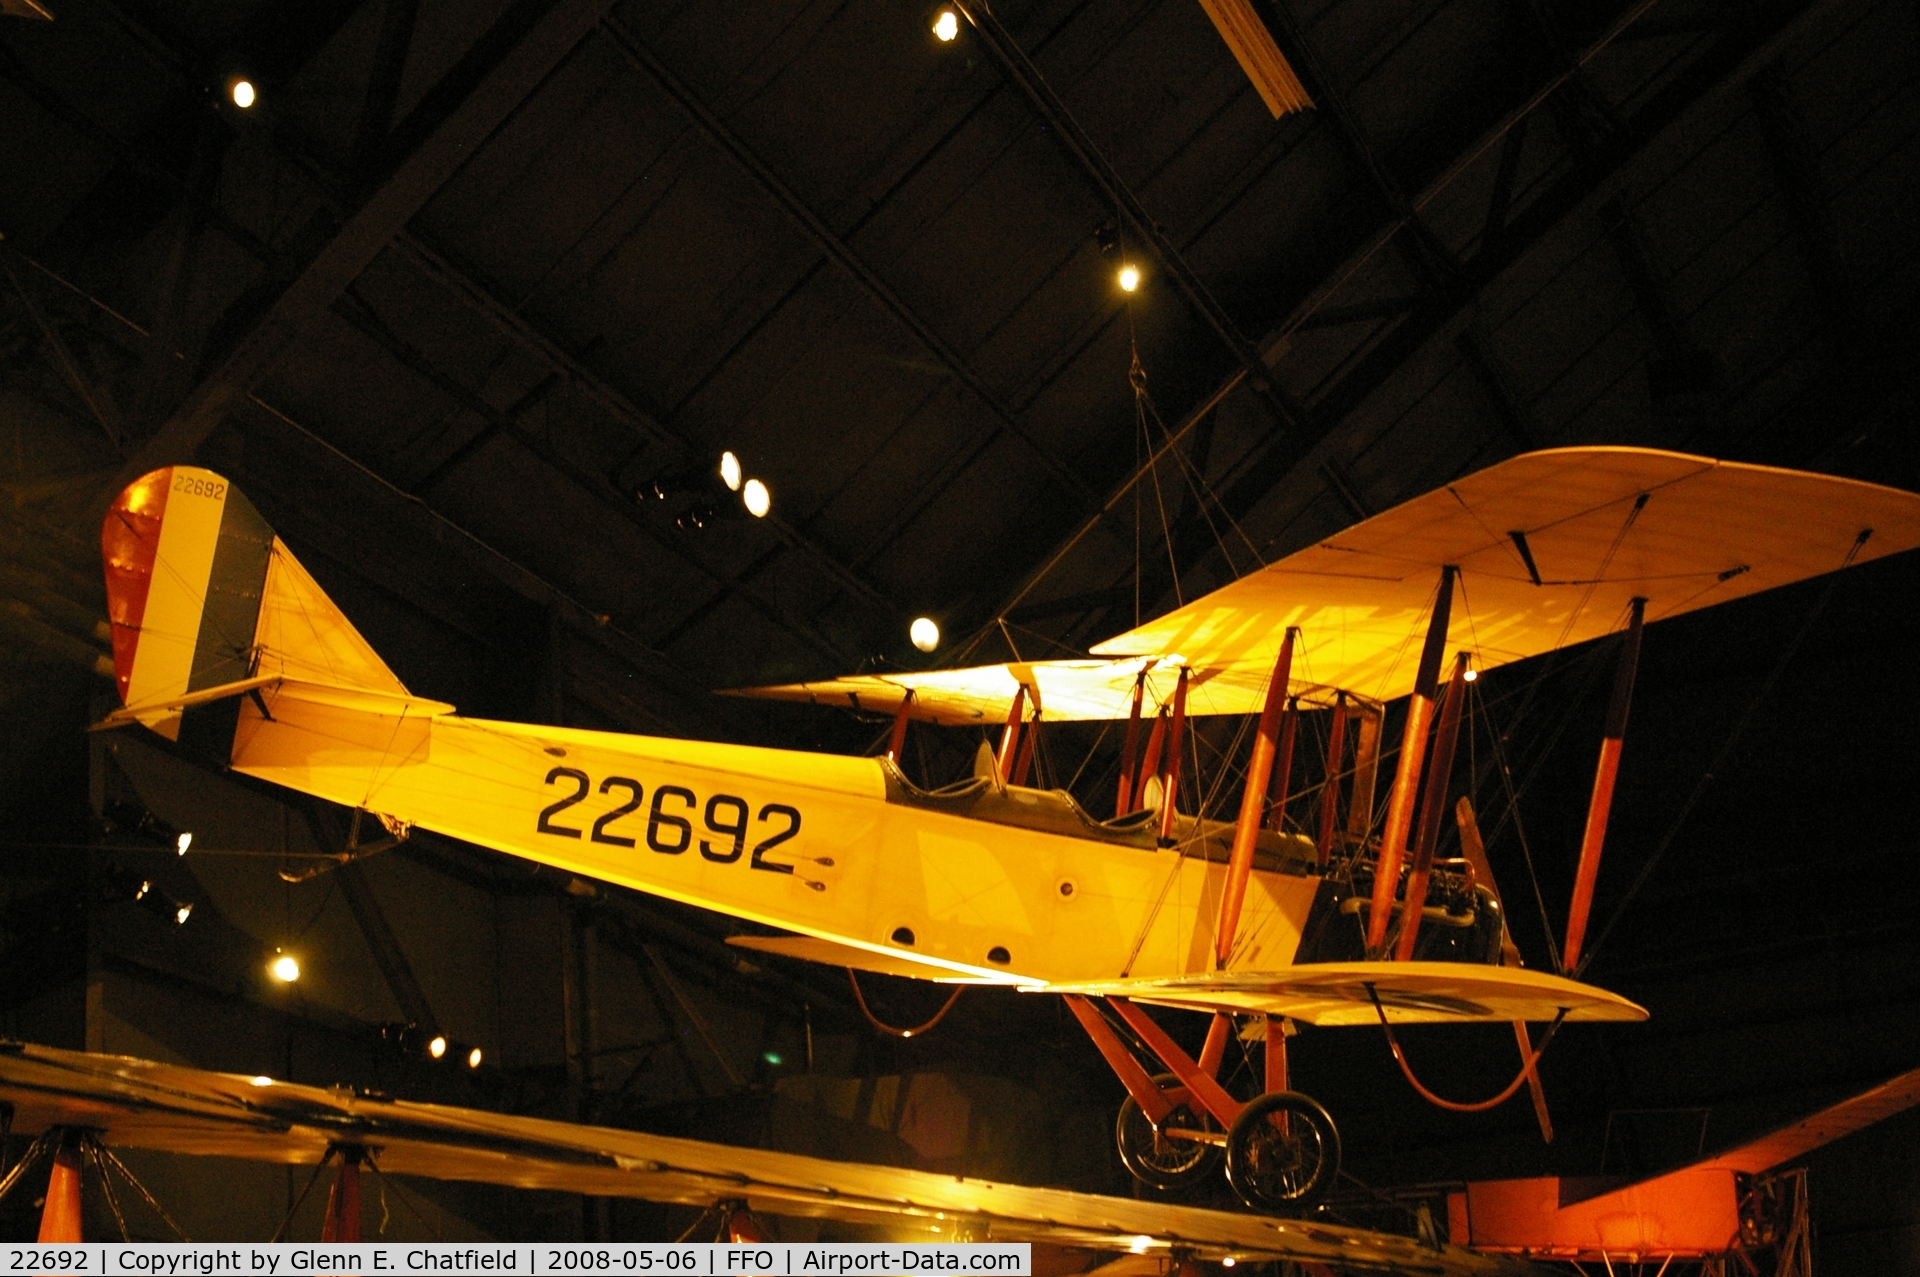 22692, 1917 Standard J-1 C/N 1141, Standard J-1 trainer at the National Museum of the U.S. Air Force